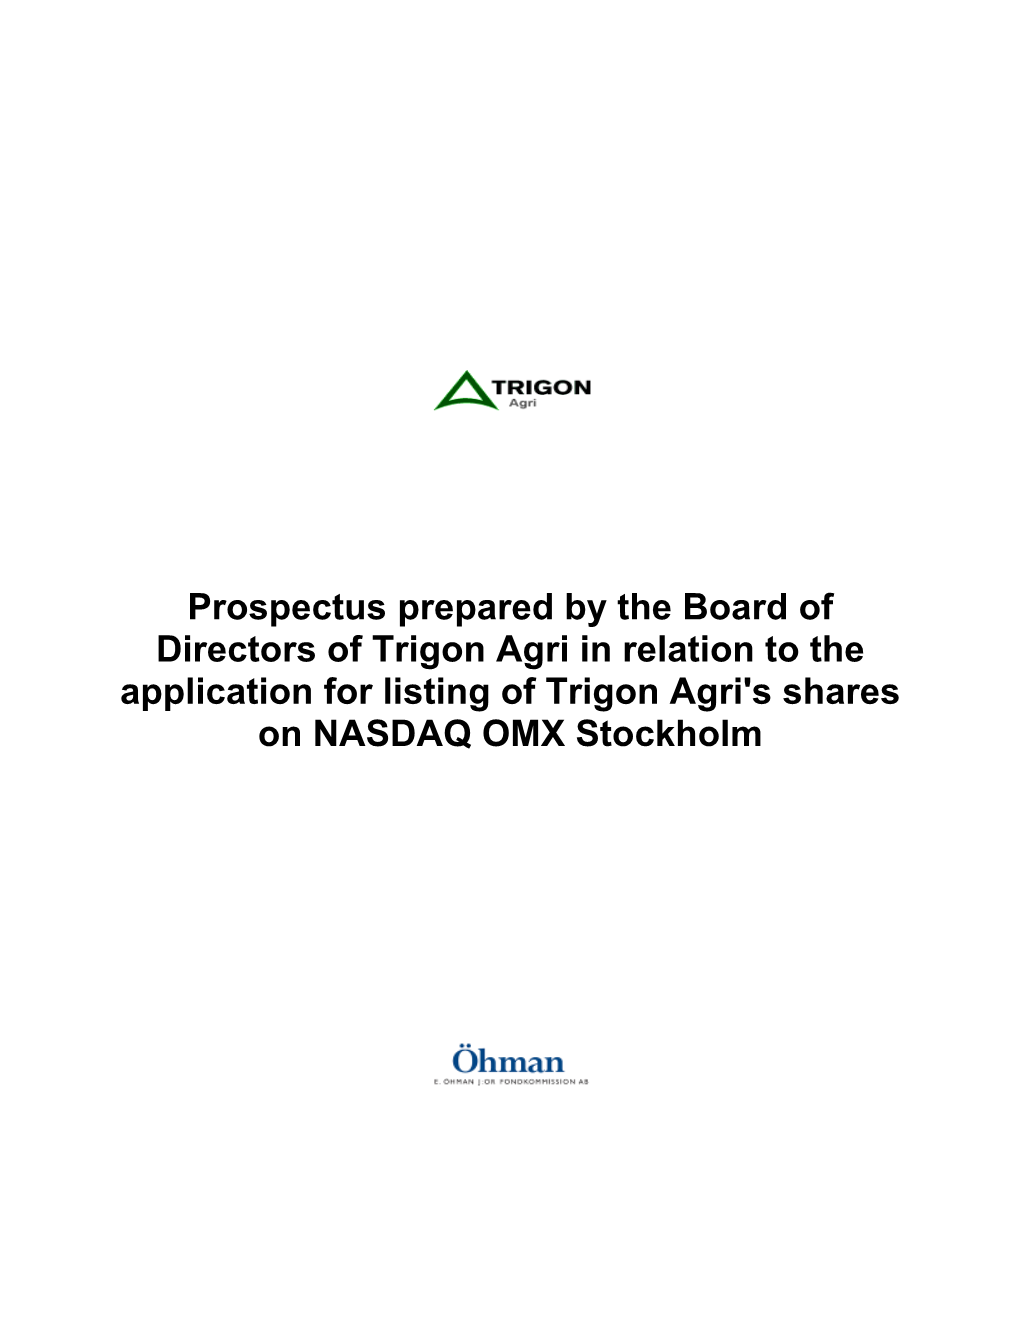 Prospectus Prepared by the Board of Directors of Trigon Agri in Relation to the Application for Listing of Trigon Agri's Shares on NASDAQ OMX Stockholm